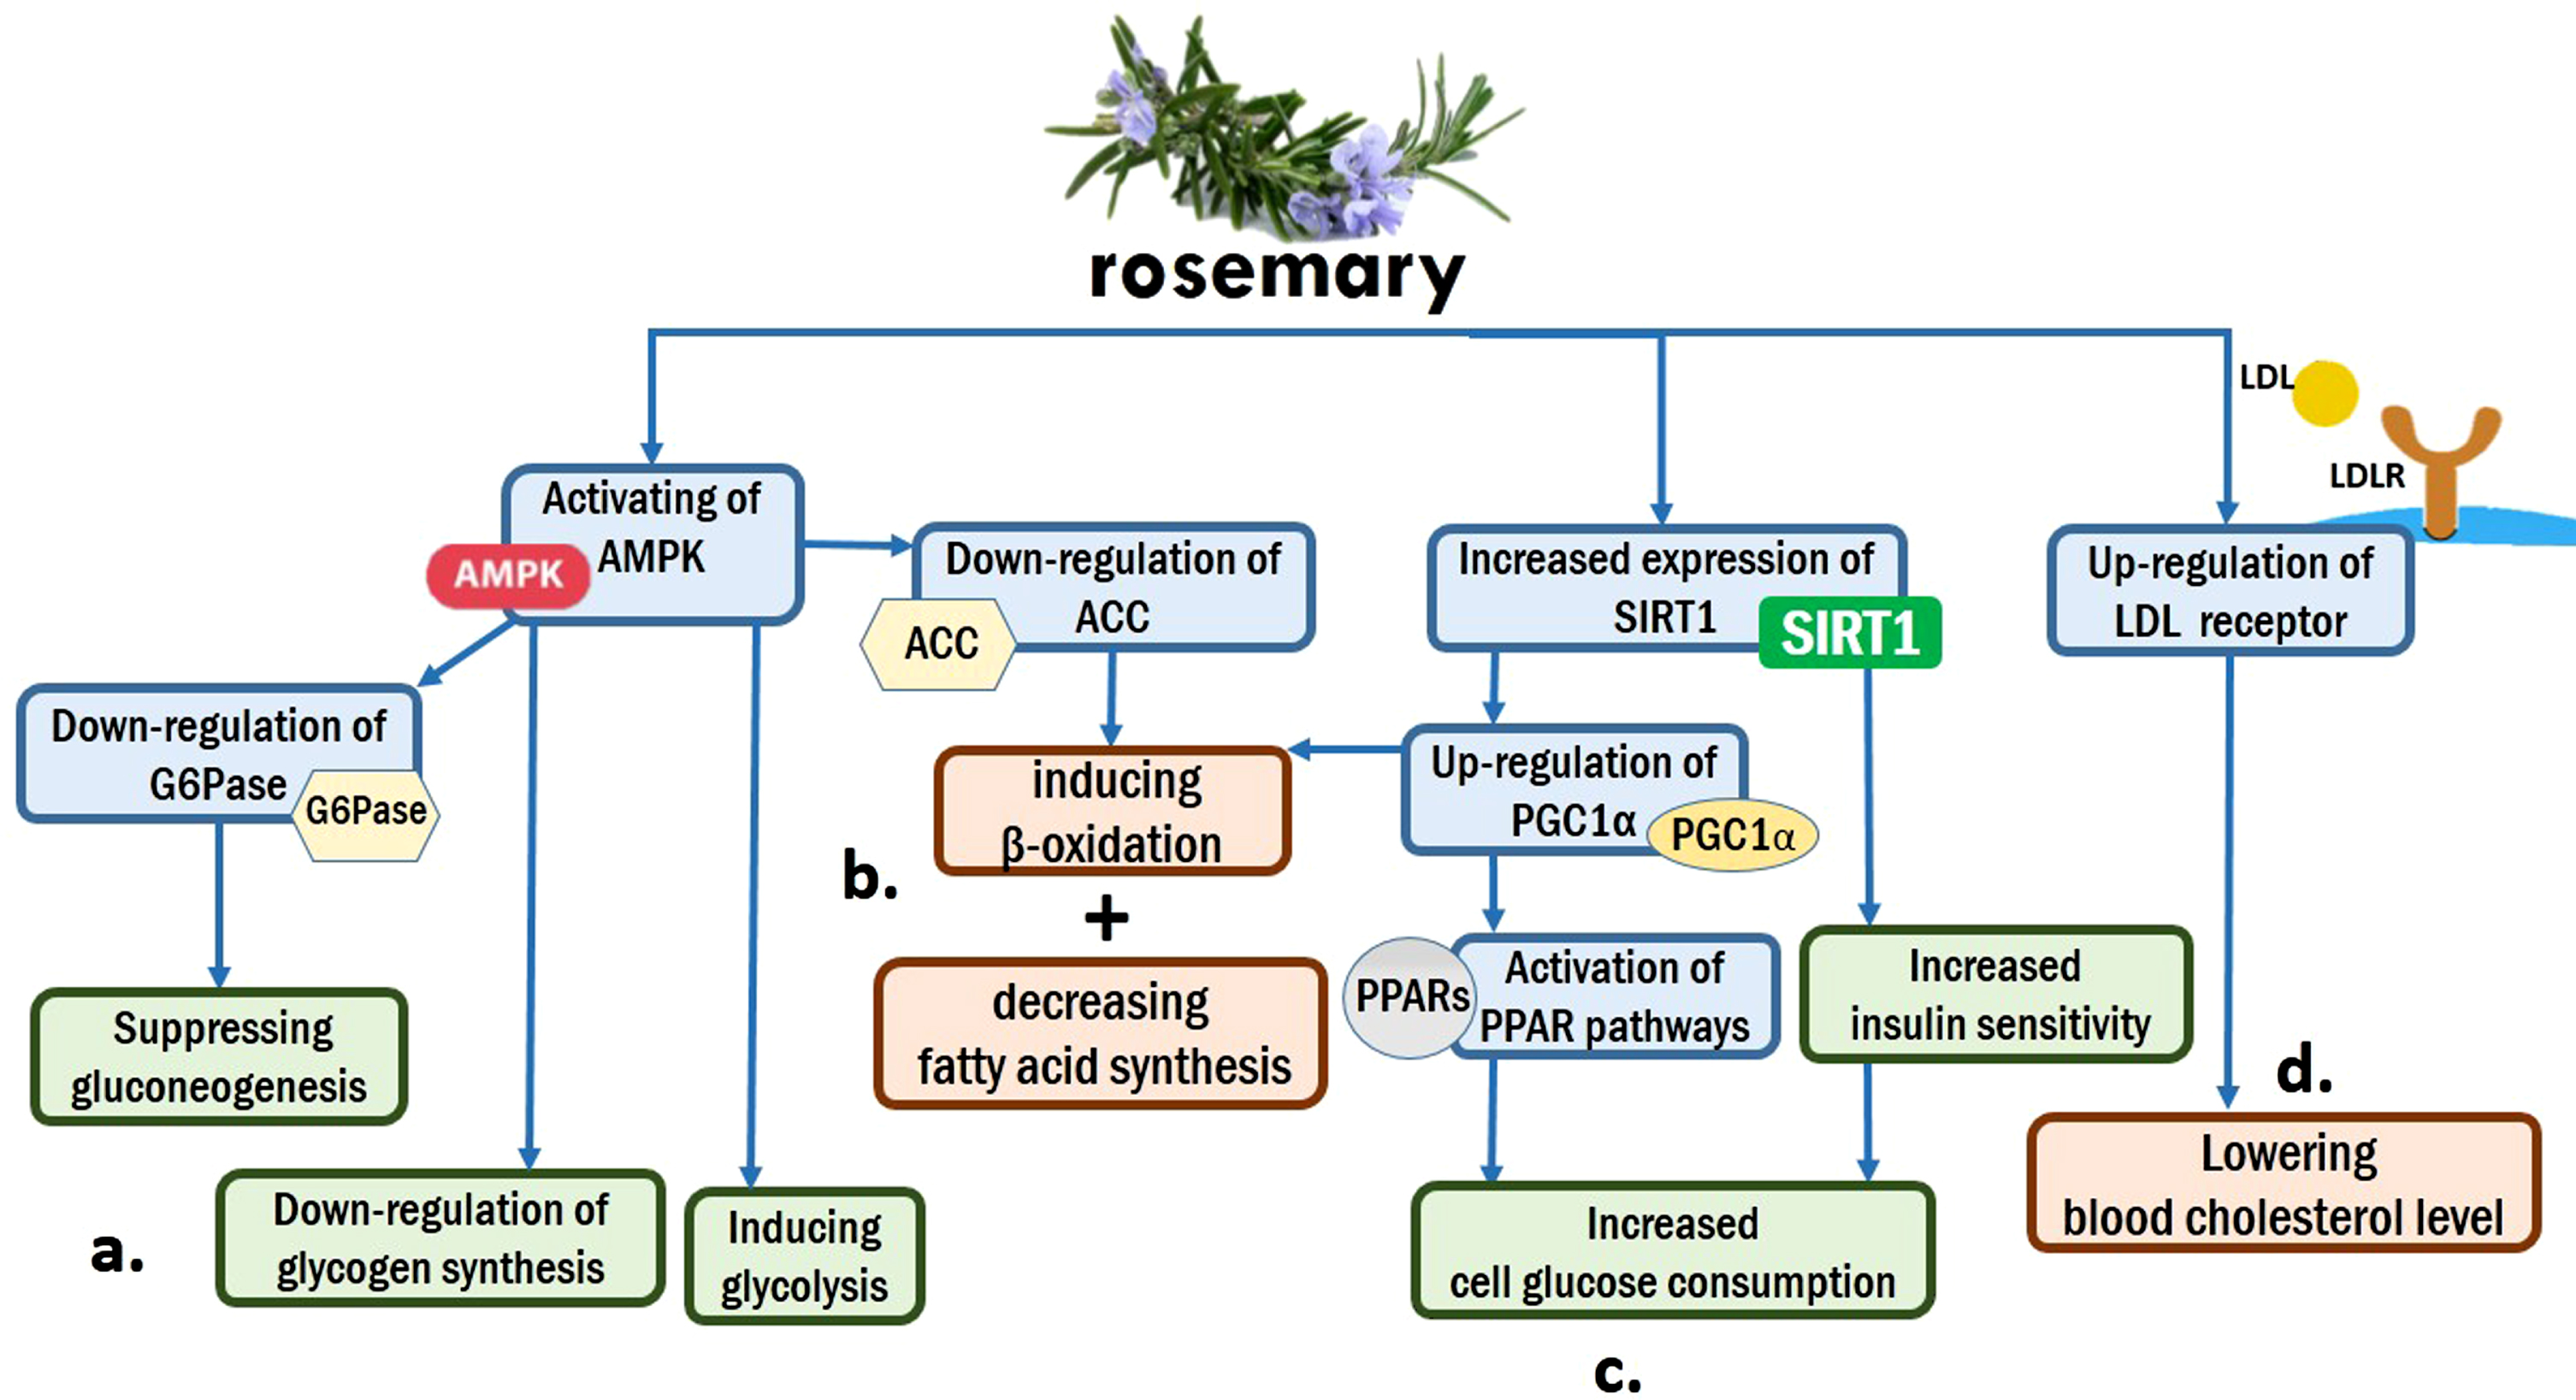 THE BENEFITS, USES, AND HISTORY OF ROSEMARY OIL & THE ROSEMARY PLA